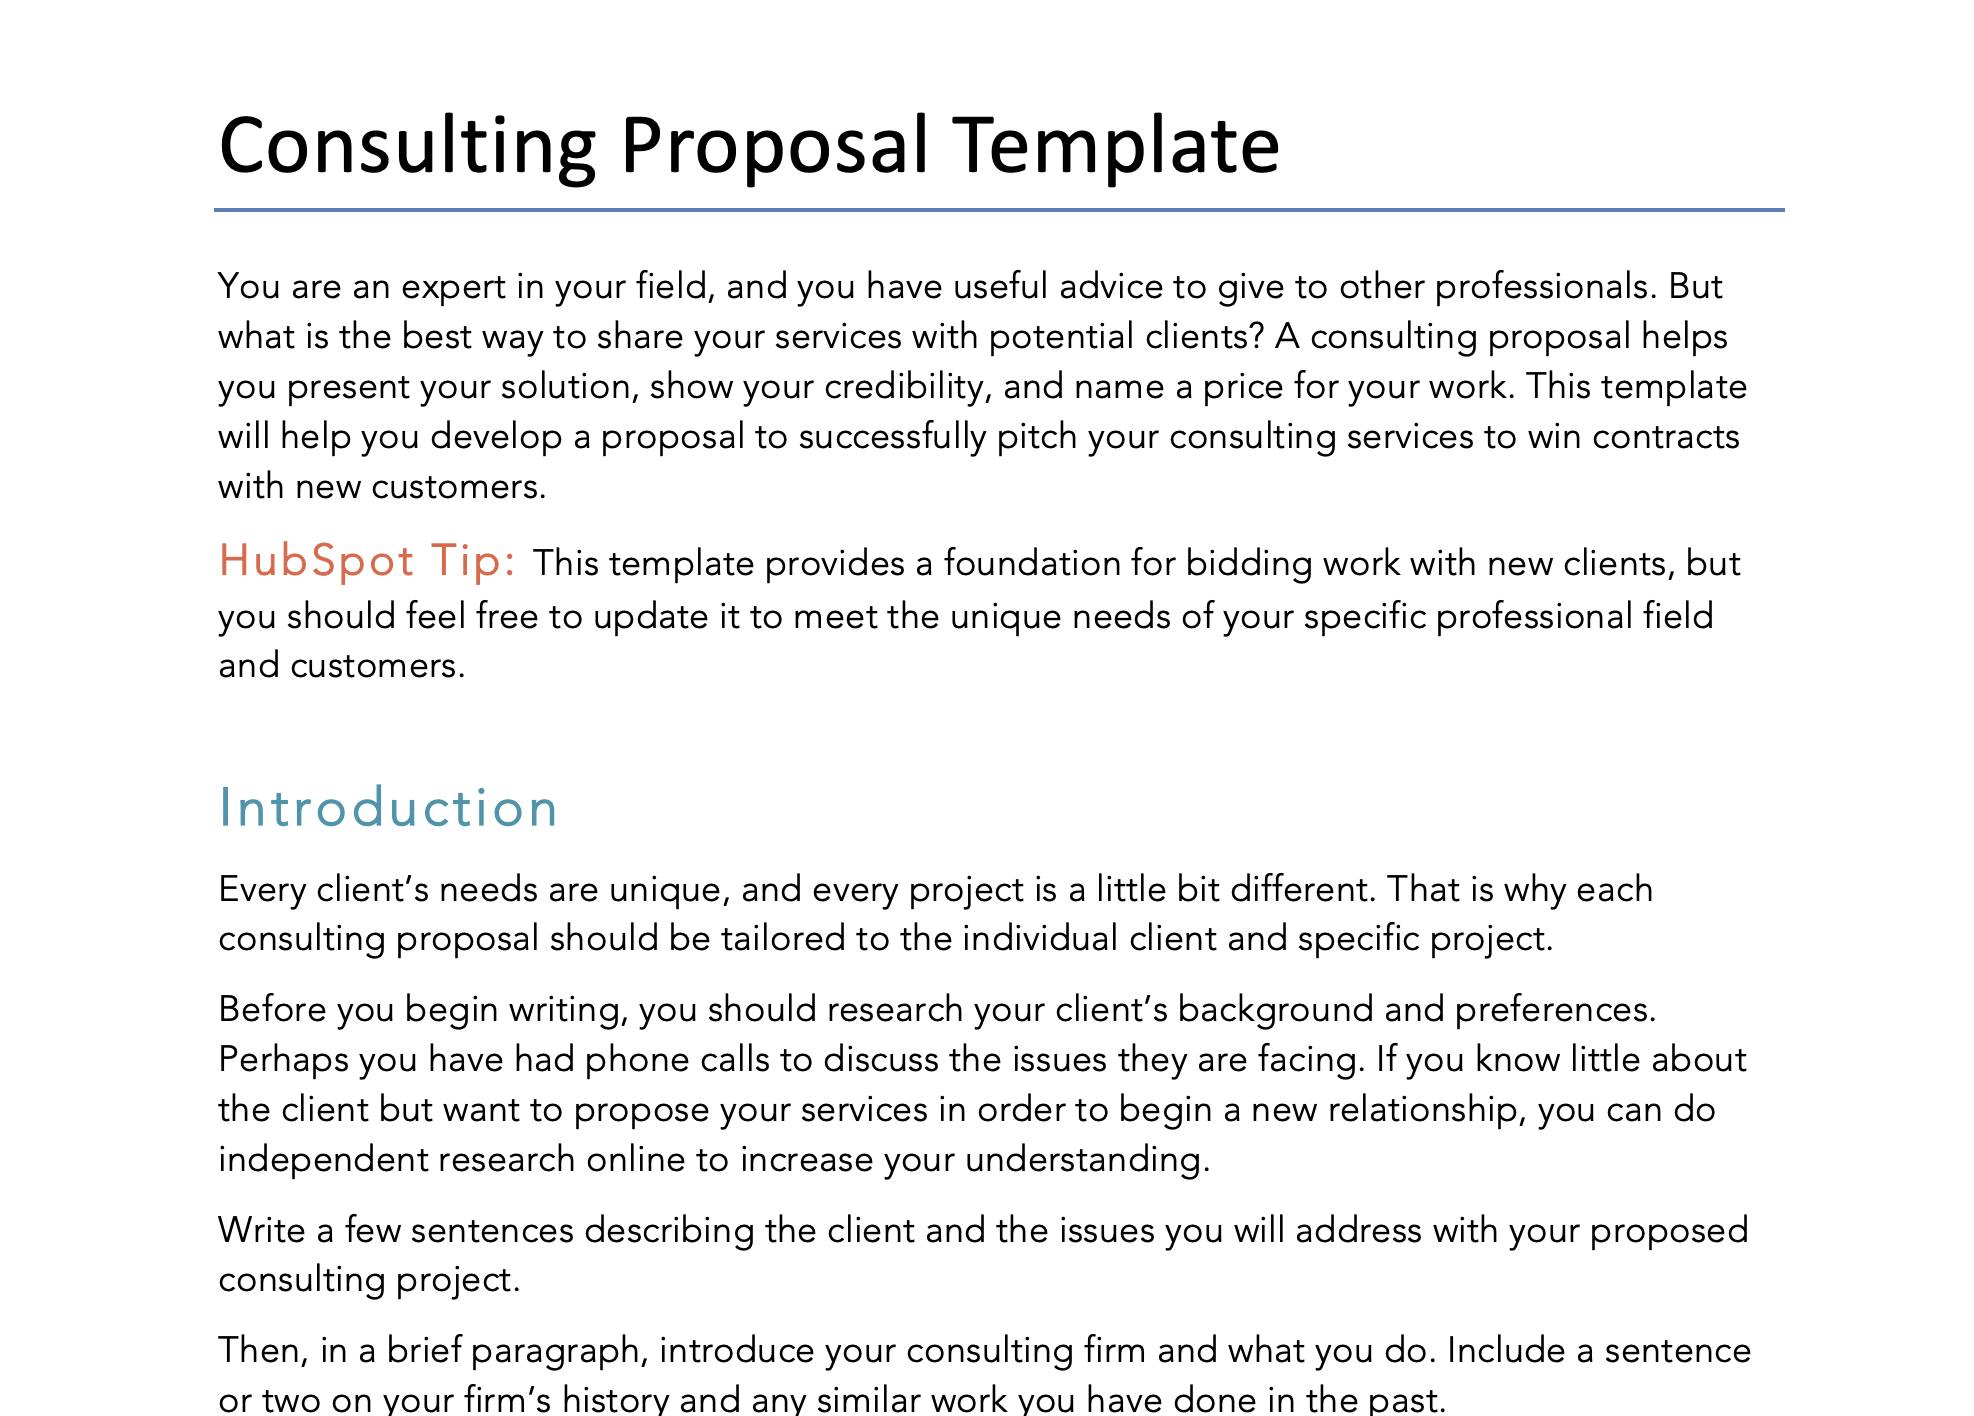 Consulting proposal template